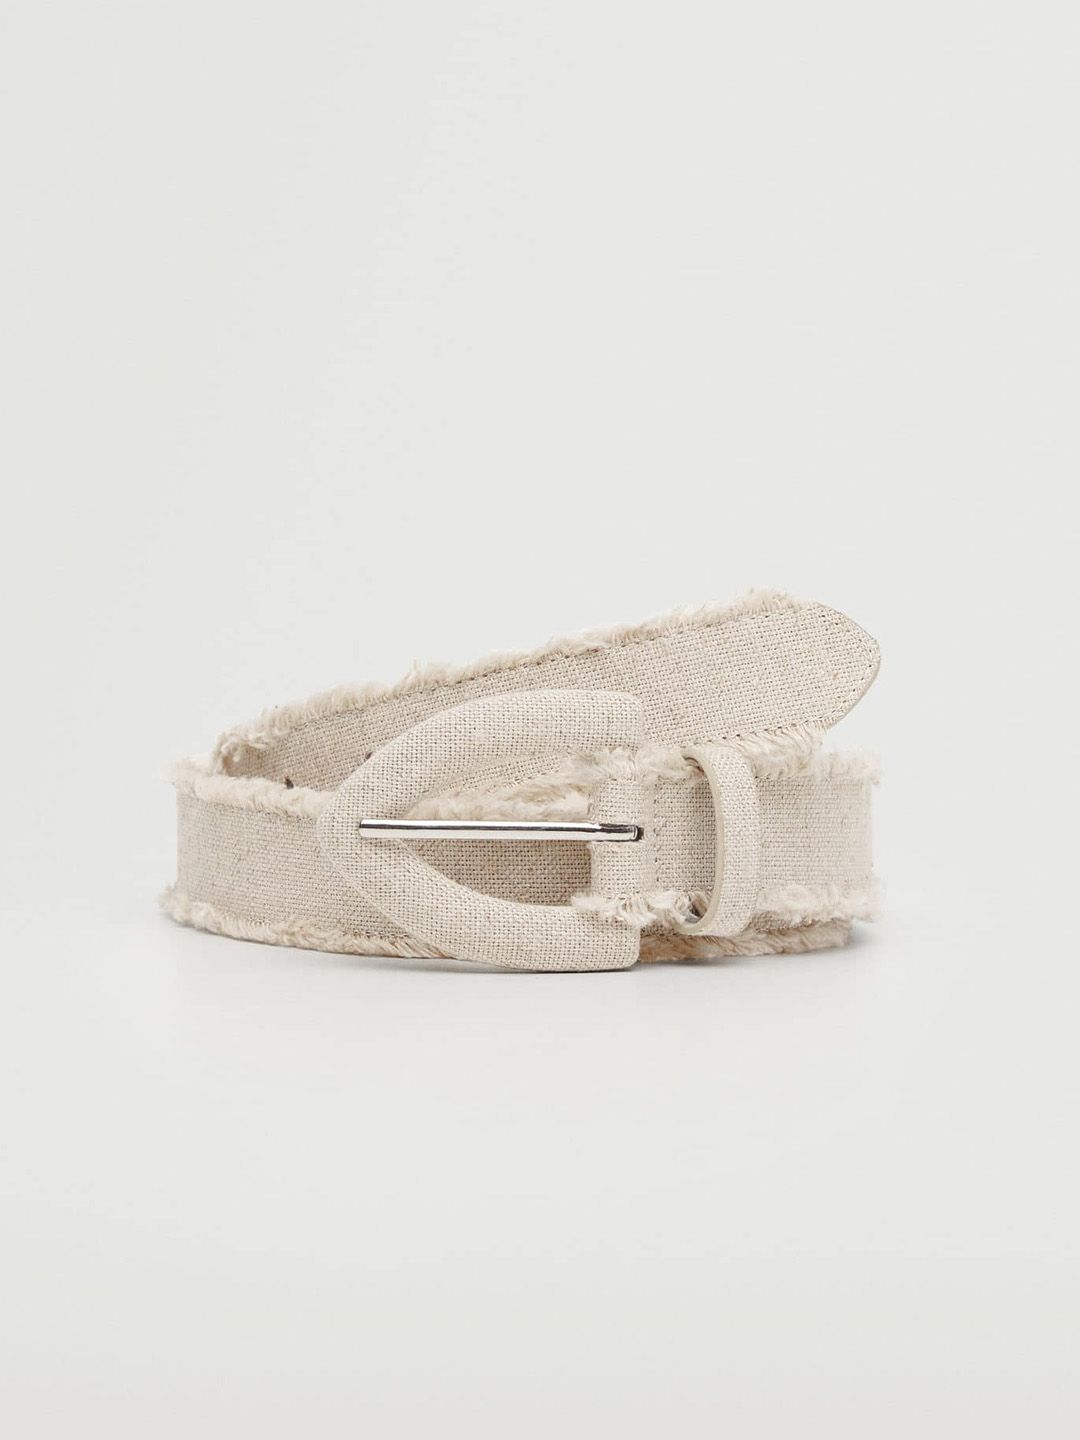 MANGO Women Cream-Coloured Solid Belt with Fringed Finish Price in India